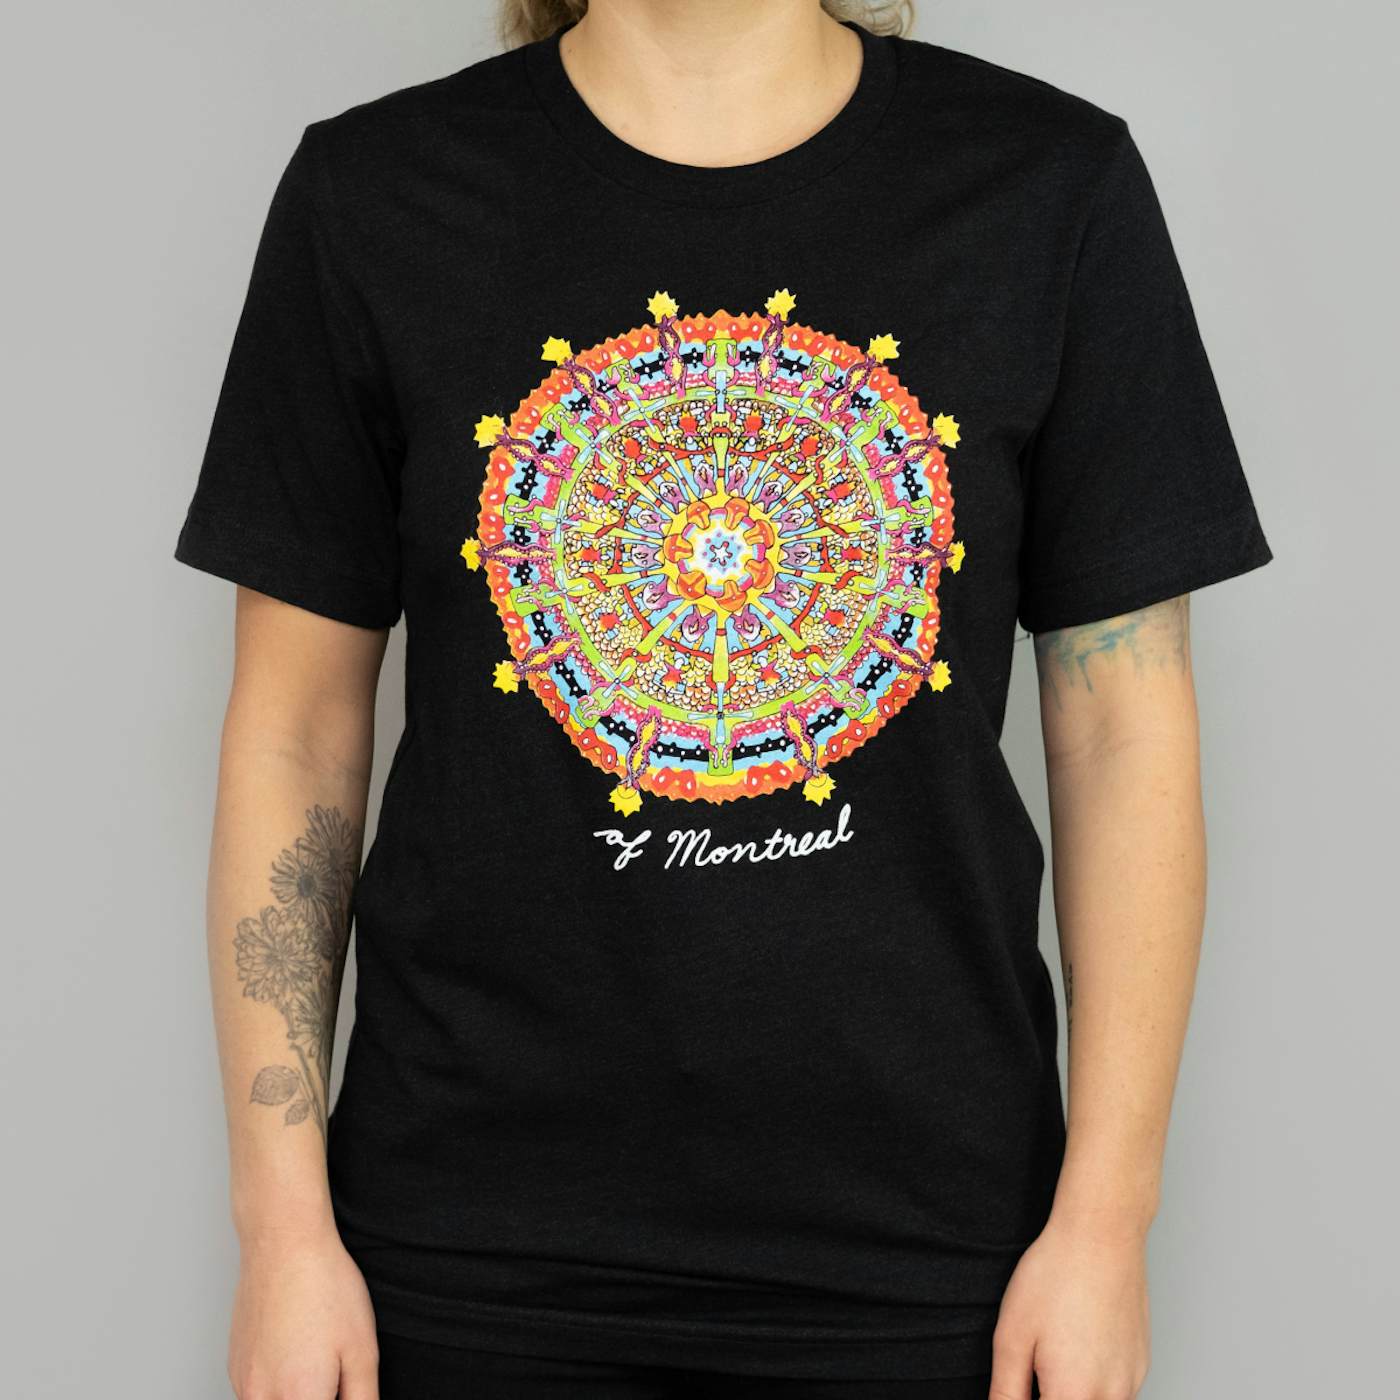 of Montreal Hissing Fauna, Are You the Destroyer? T-Shirt